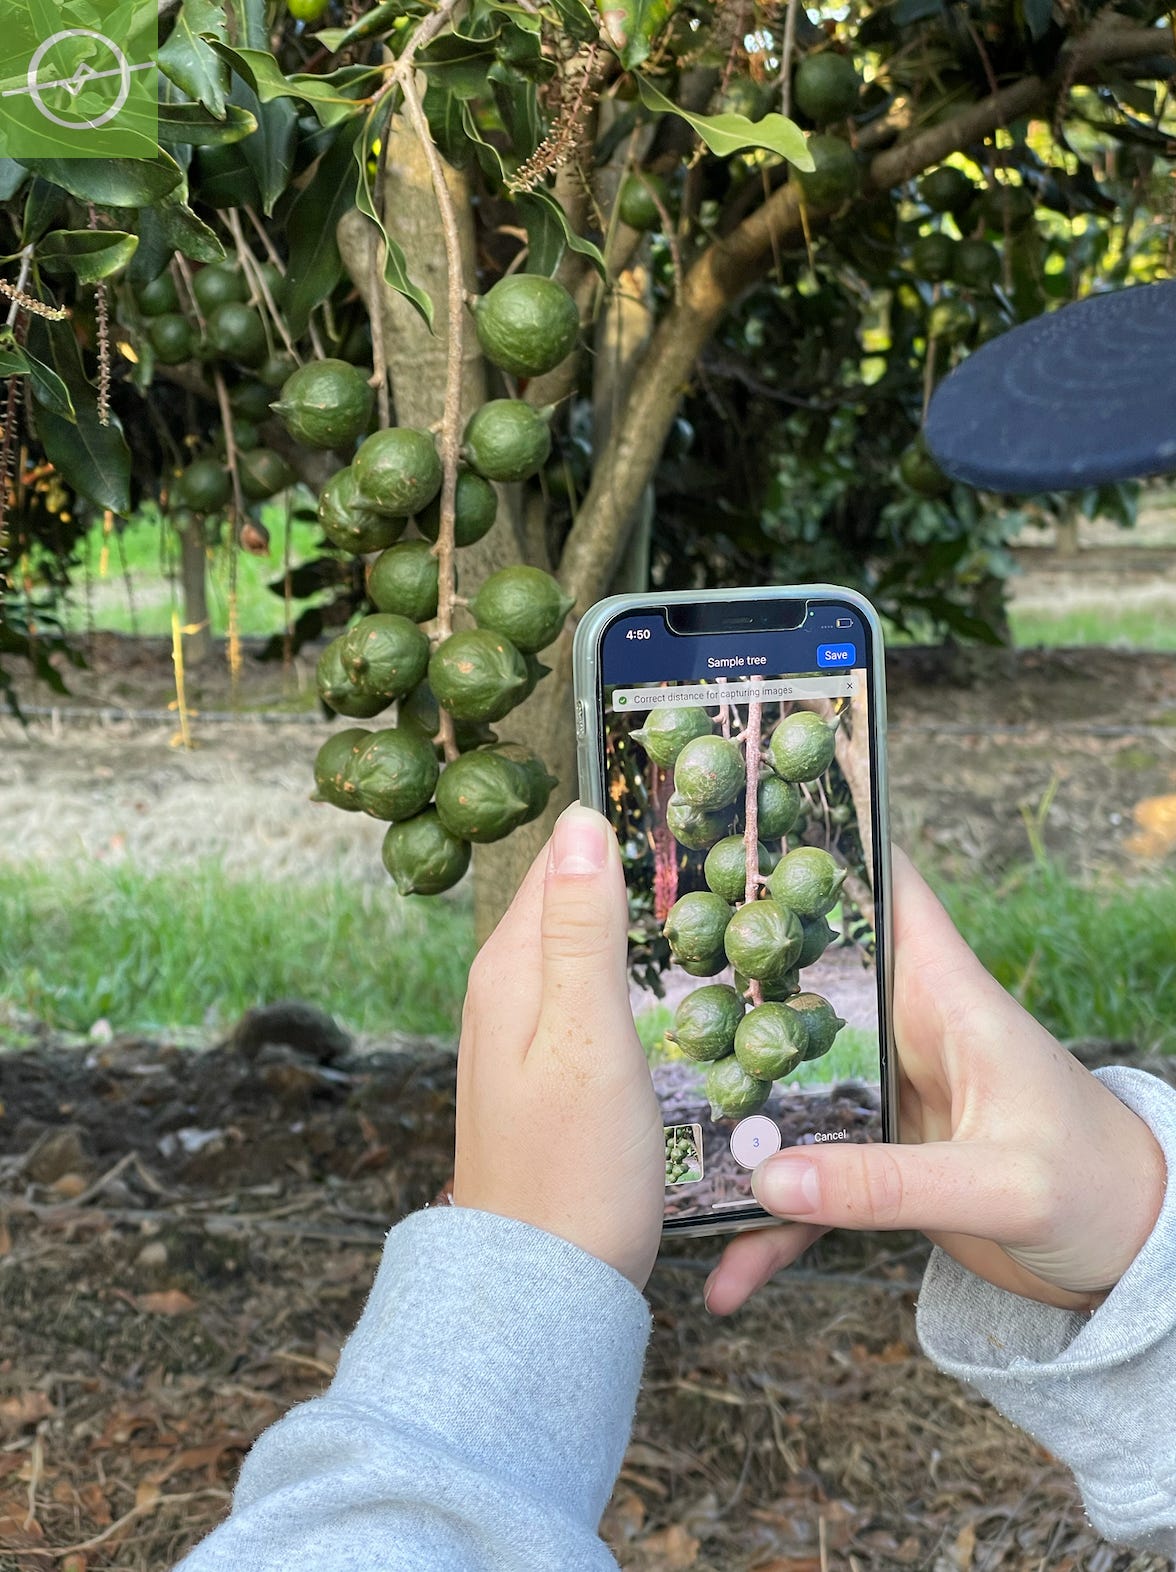 The Aerobotics “Aeroview InField” Ai-powered nut sizing mobile app in use: an in-field scout uses a mobile phone to take photographs of macadamia nuts